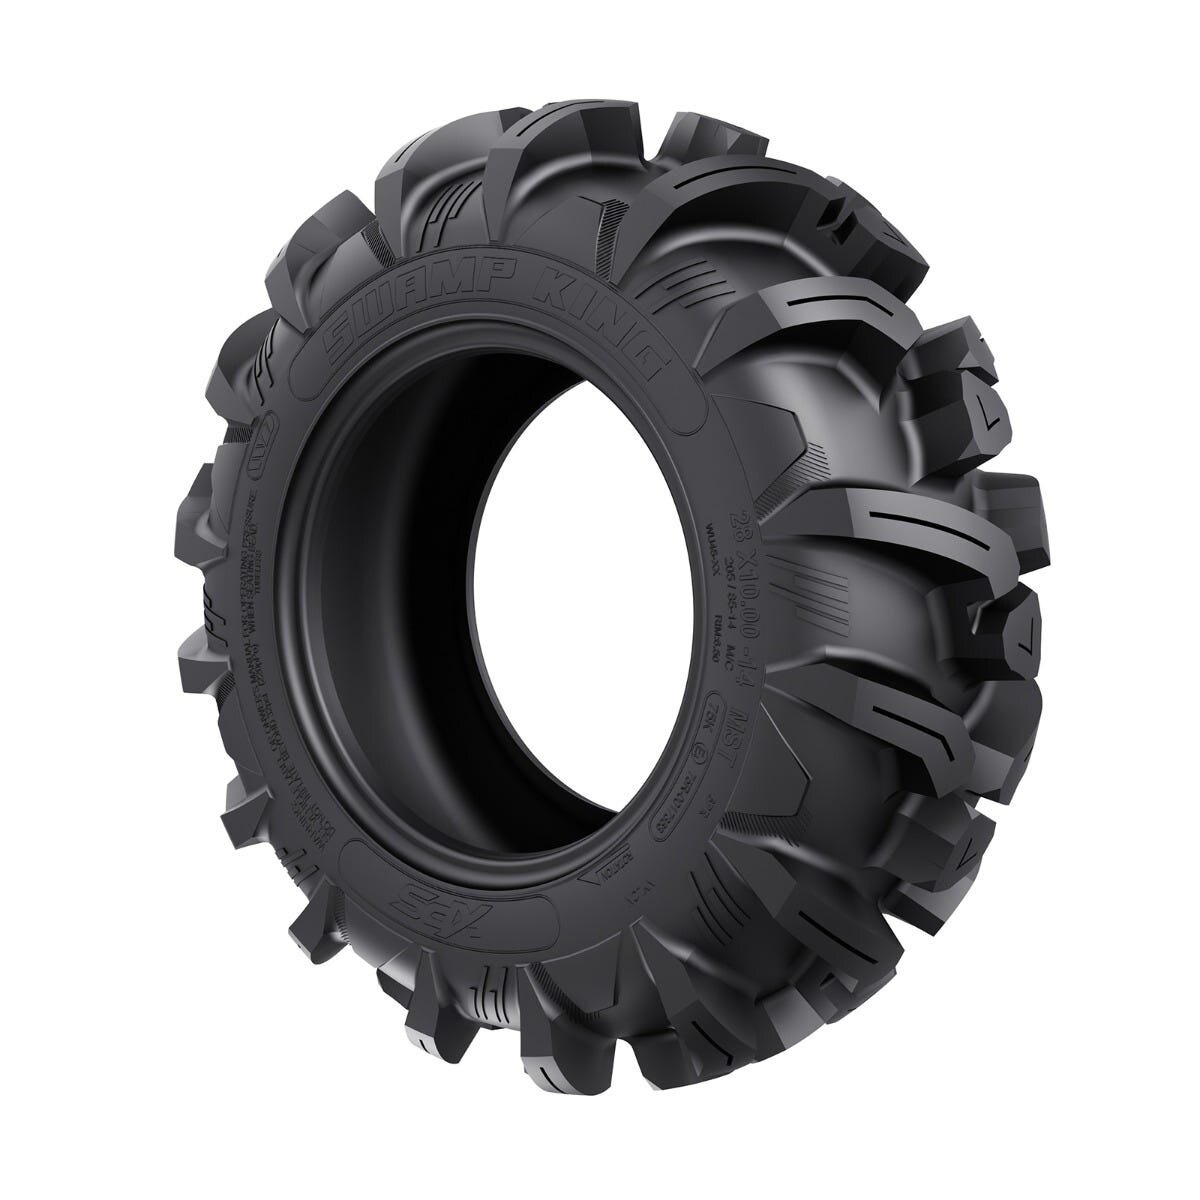 28x10 14 XPS Swamp King Tire